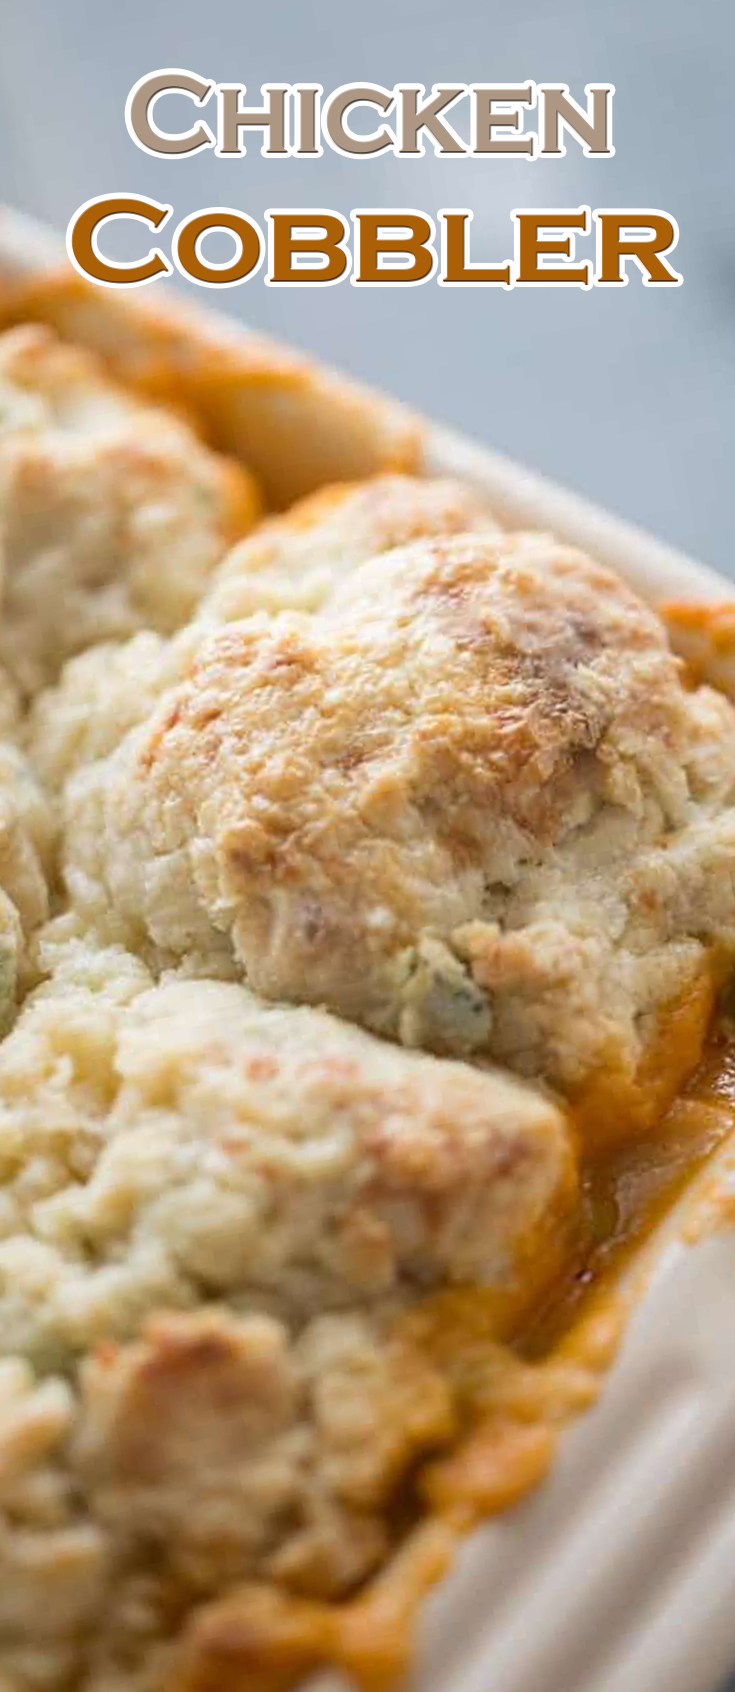 Chicken Cobbler Recipe Chicken Cobbler Casserole Southern Recipes Favorite Food Biscuits Comfort Easy Cheese Cream Preparation Amount Fair Takes But